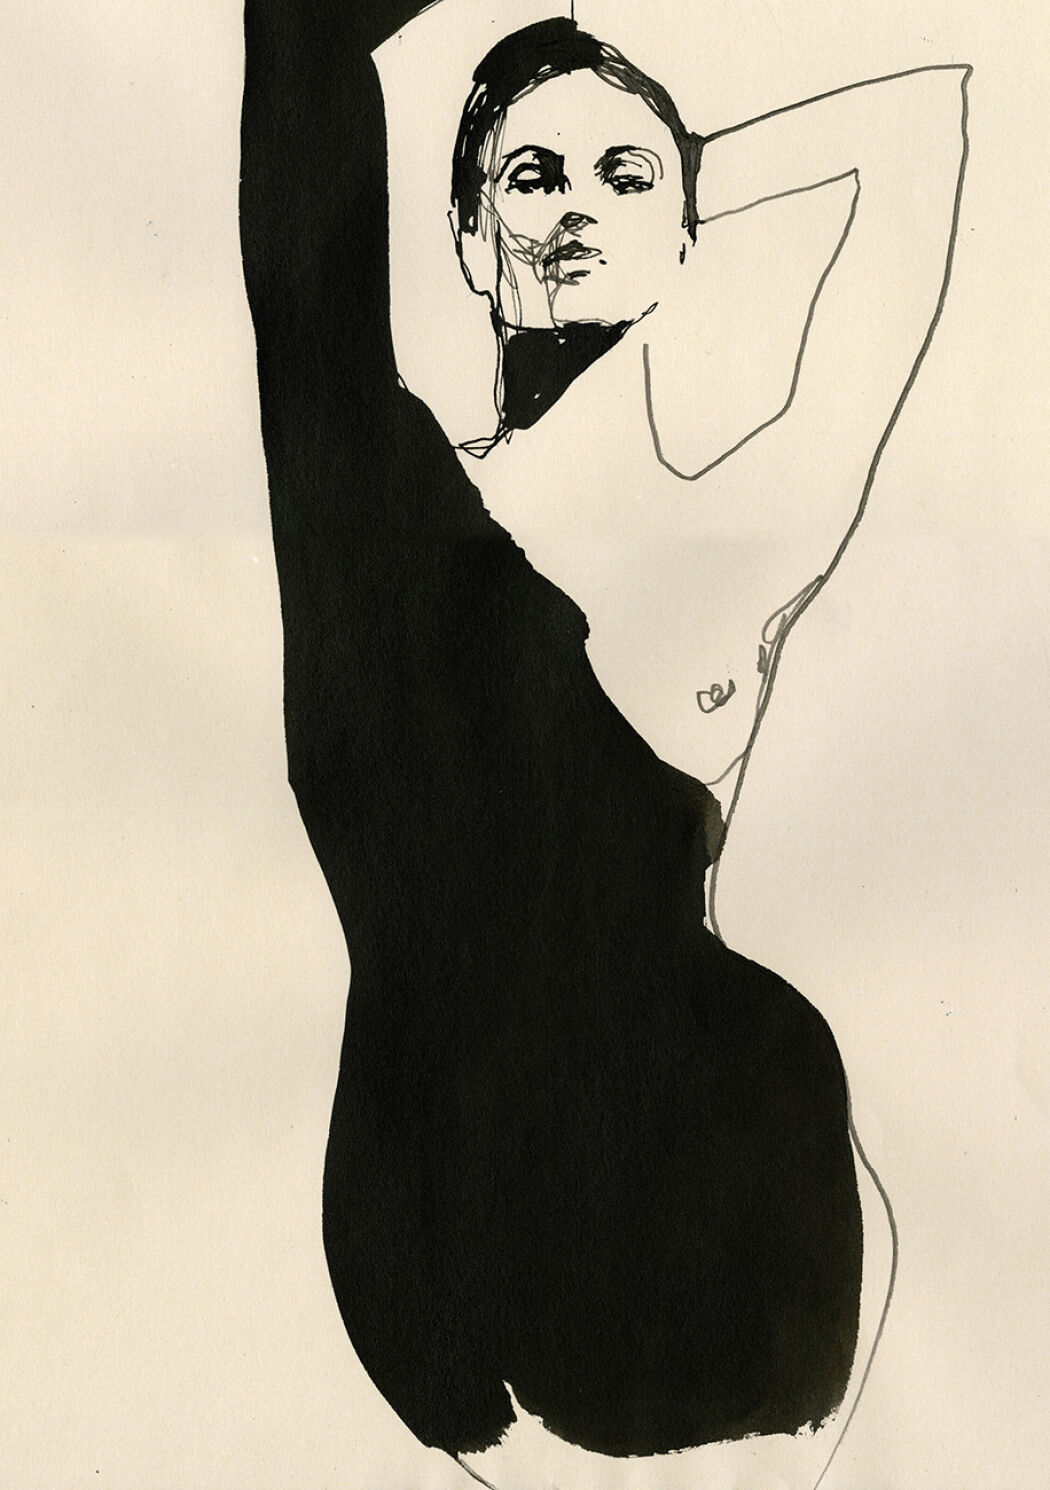 Black ink illustration by Stina Persson